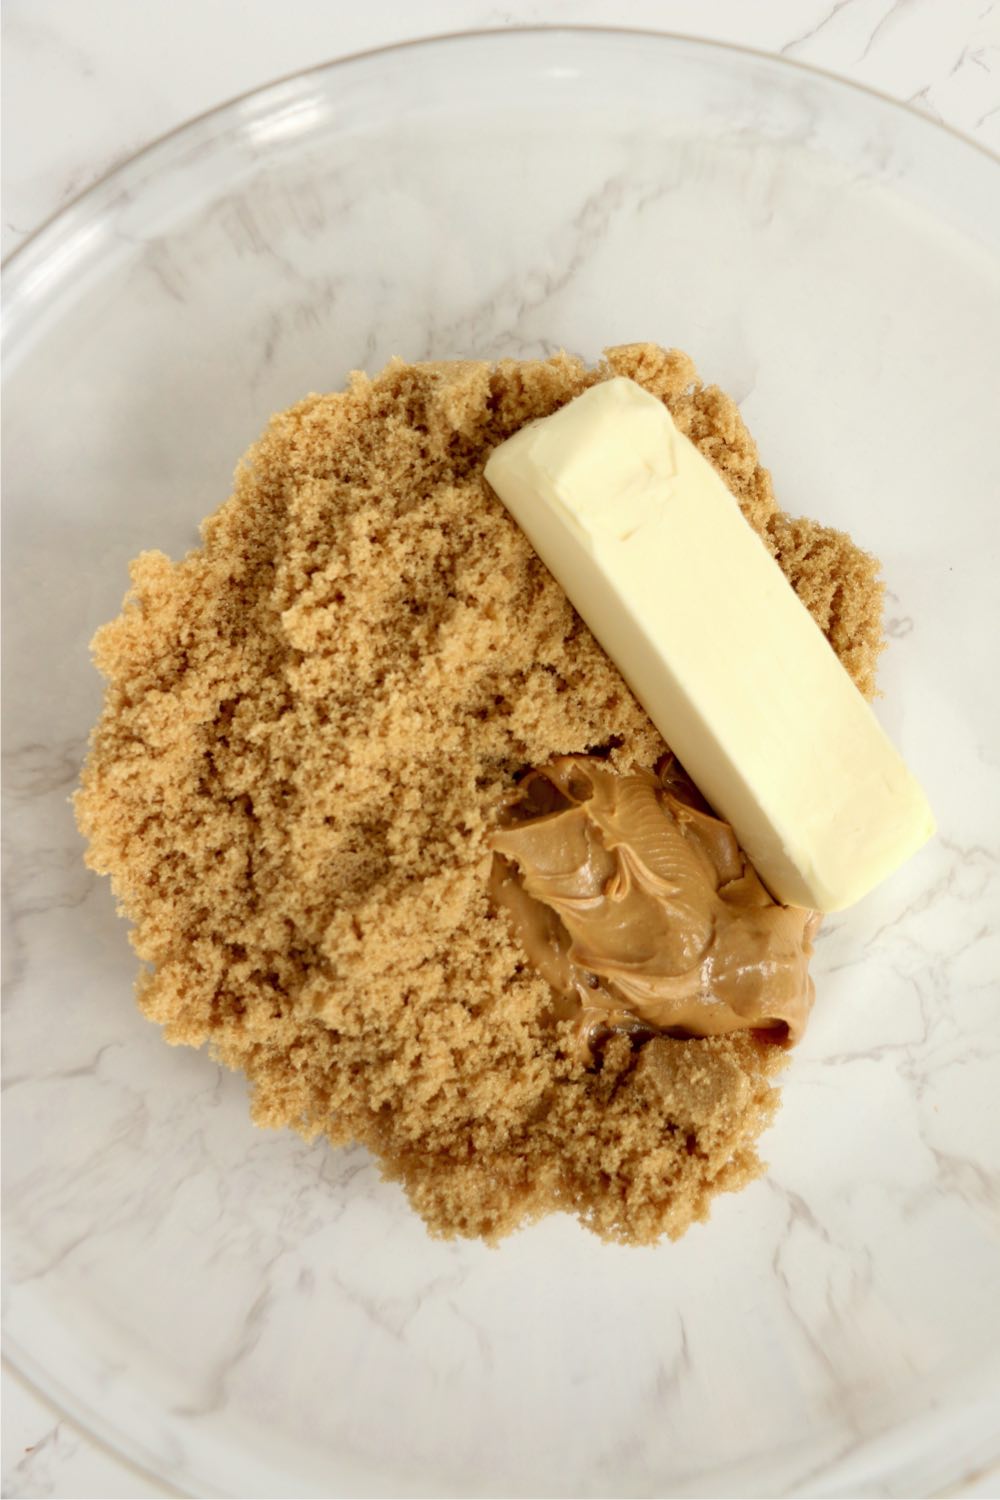 Glass bowl with butter, peanut butter and brown sugar